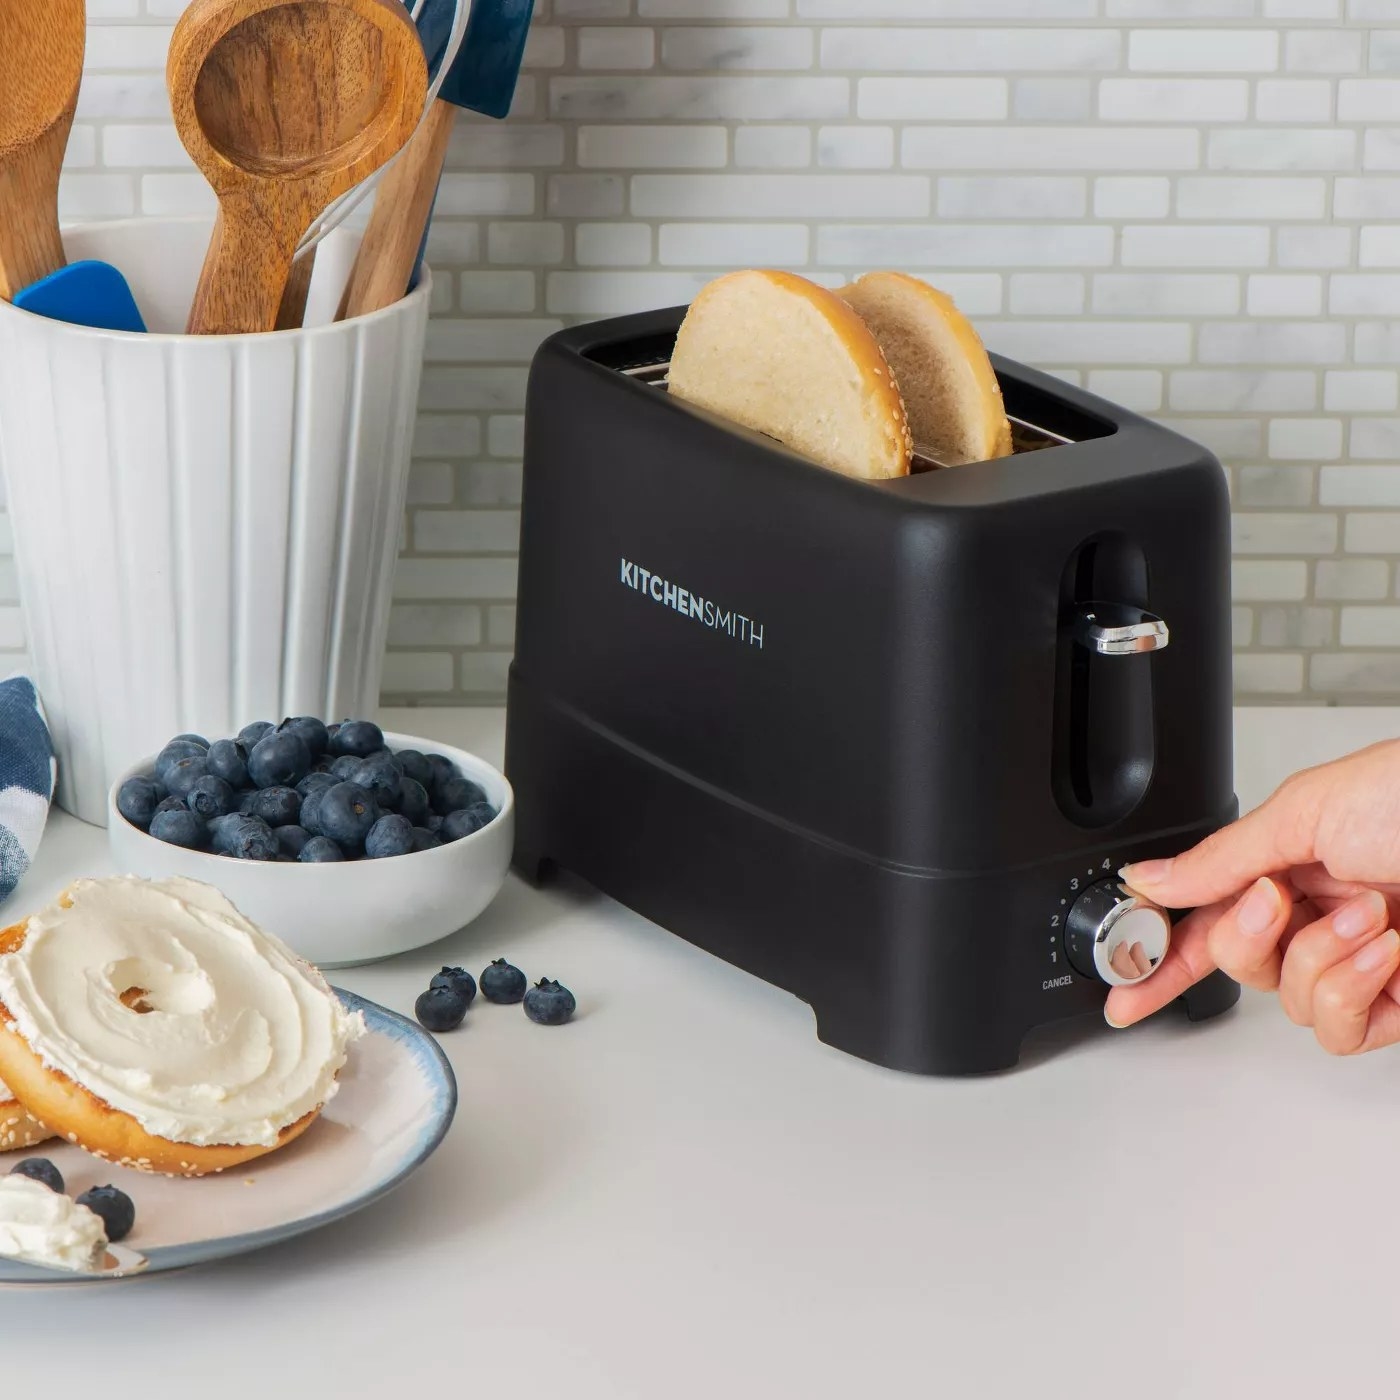 The black toaster says &quot;KITCHENSMITH&quot; and has two sesame bagel slices inside and is surrounded by blueberries, another bagel with cream cheese and various kitchen tools